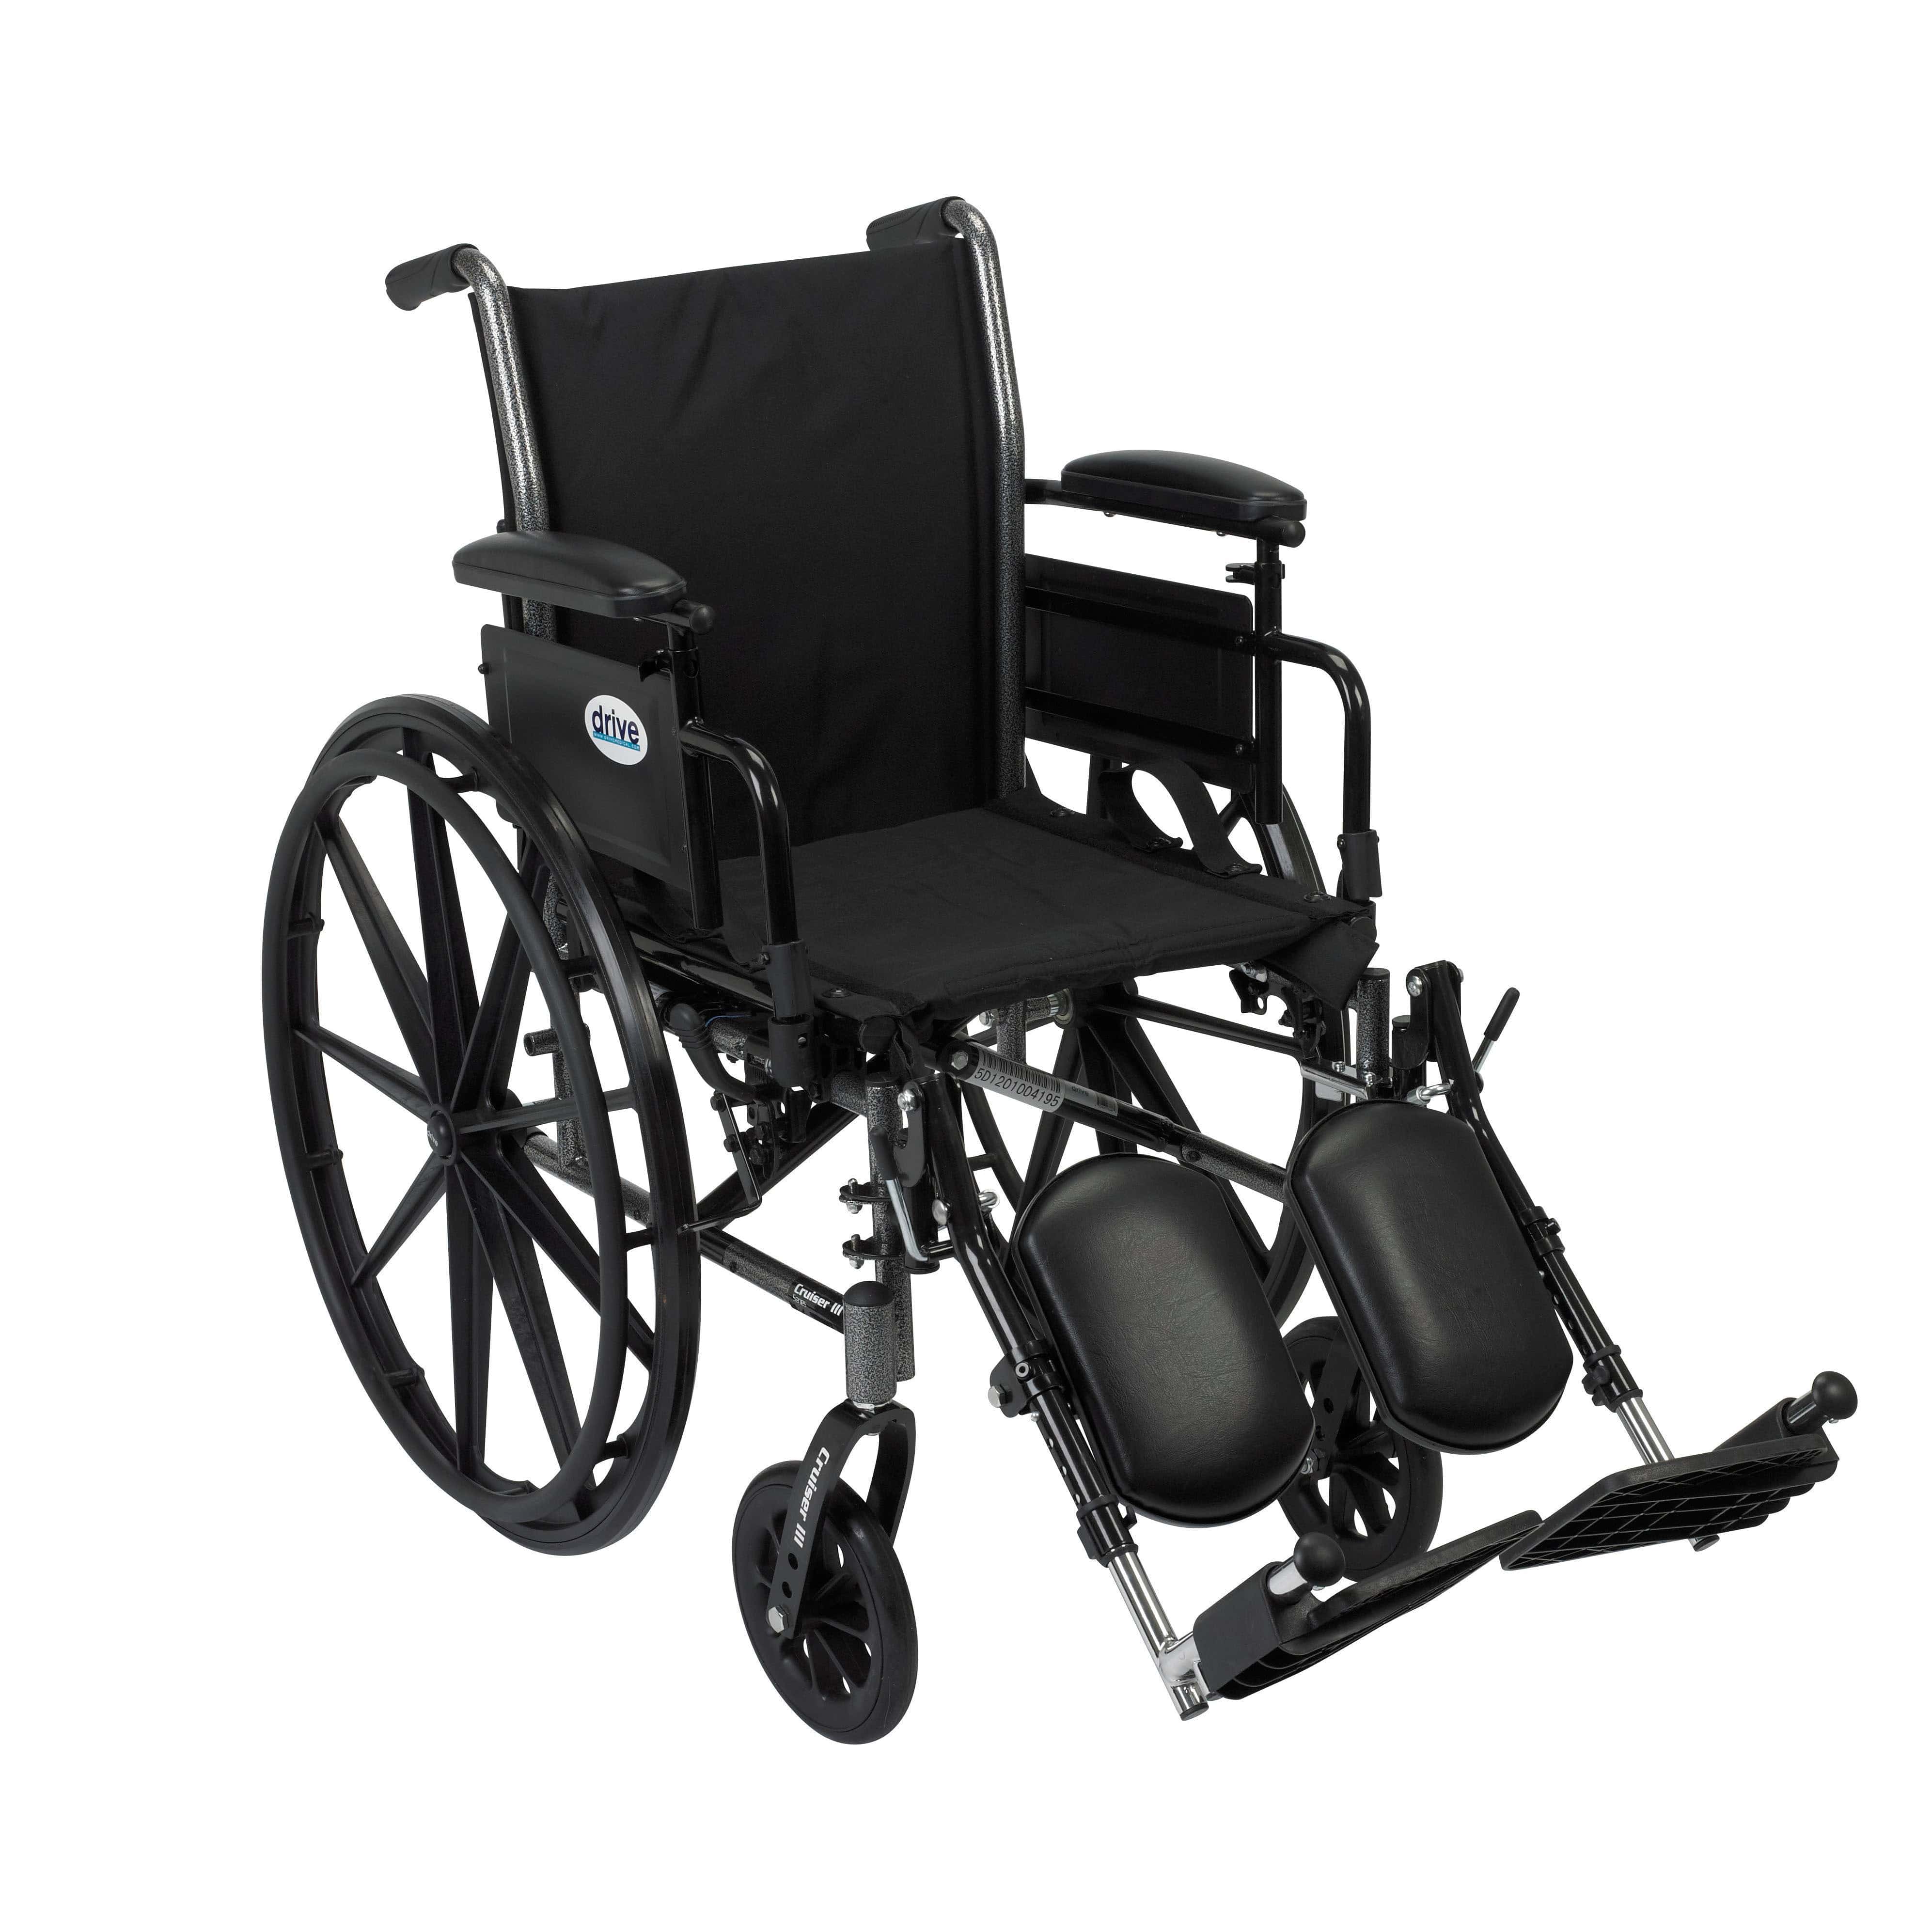 Drive Medical Wheelchairs Flip Back Removable Adjustable Height Desk Arms and Elevating Leg Rests / 16" Seat Drive Medical Cruiser III Light Weight Wheelchair with Flip Back Removable Arms